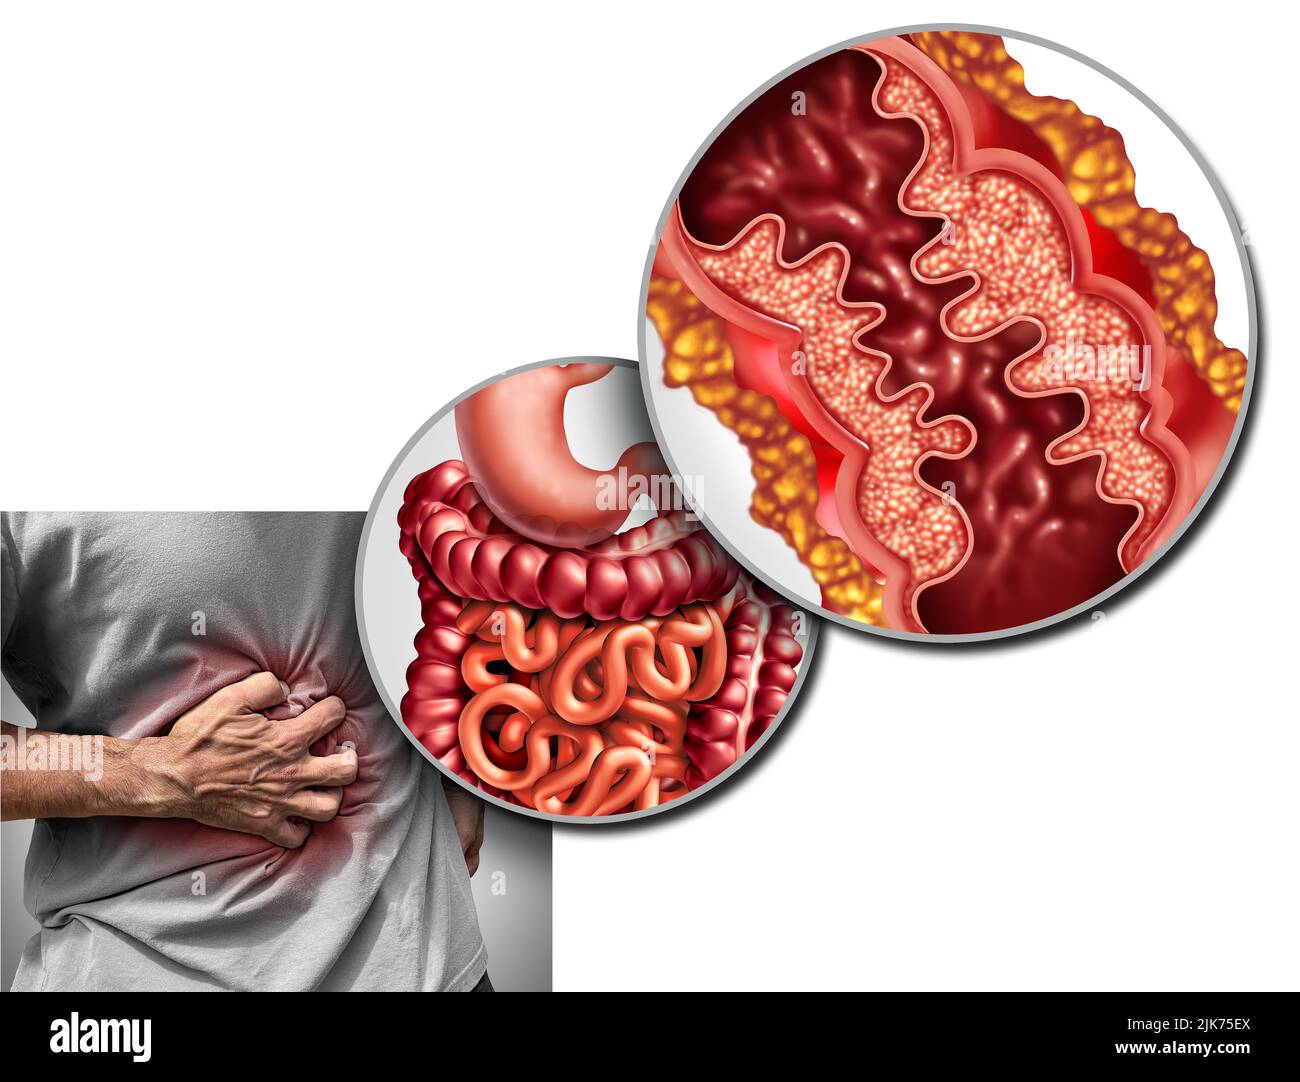 Crohn's disease pain and Crohn syndrome illness or crohns disorder as a medical concept with a close up of a human intestine with inflammation. Stock Photo